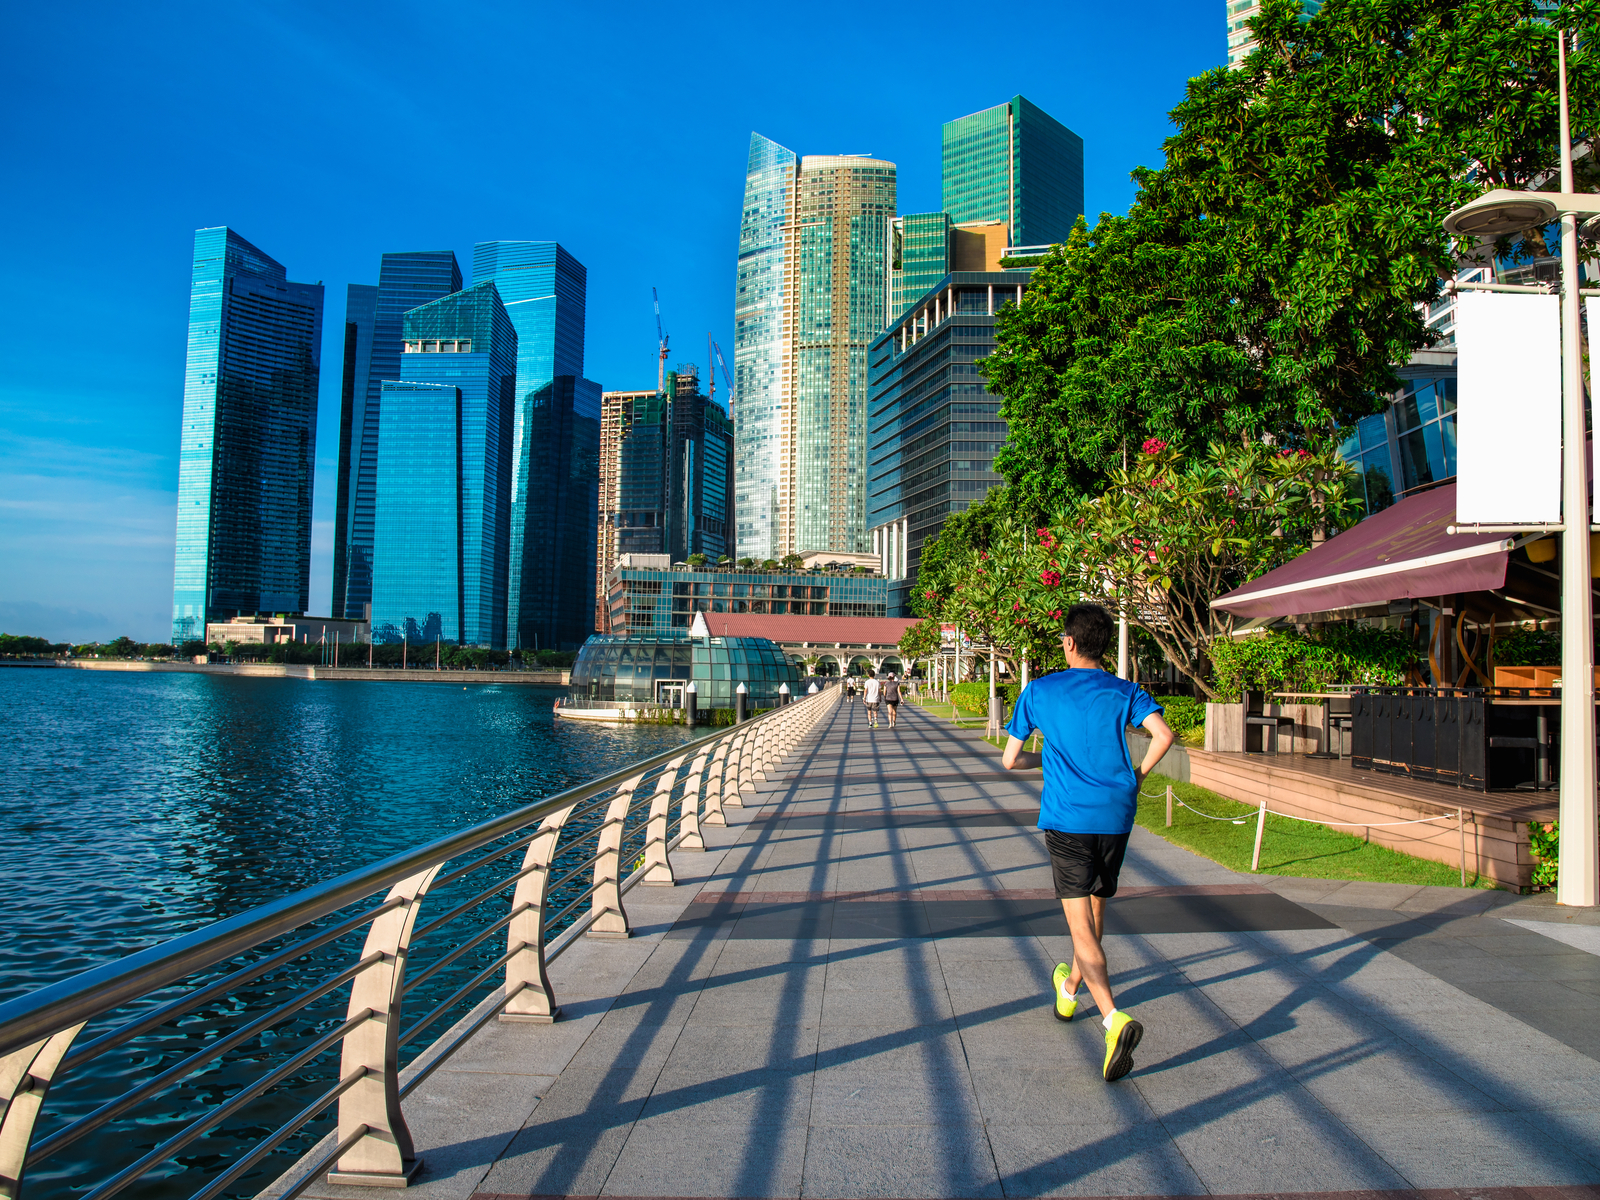 Guy running on the waterfront path during the best time to go to Singapore with clear sky and warm weather